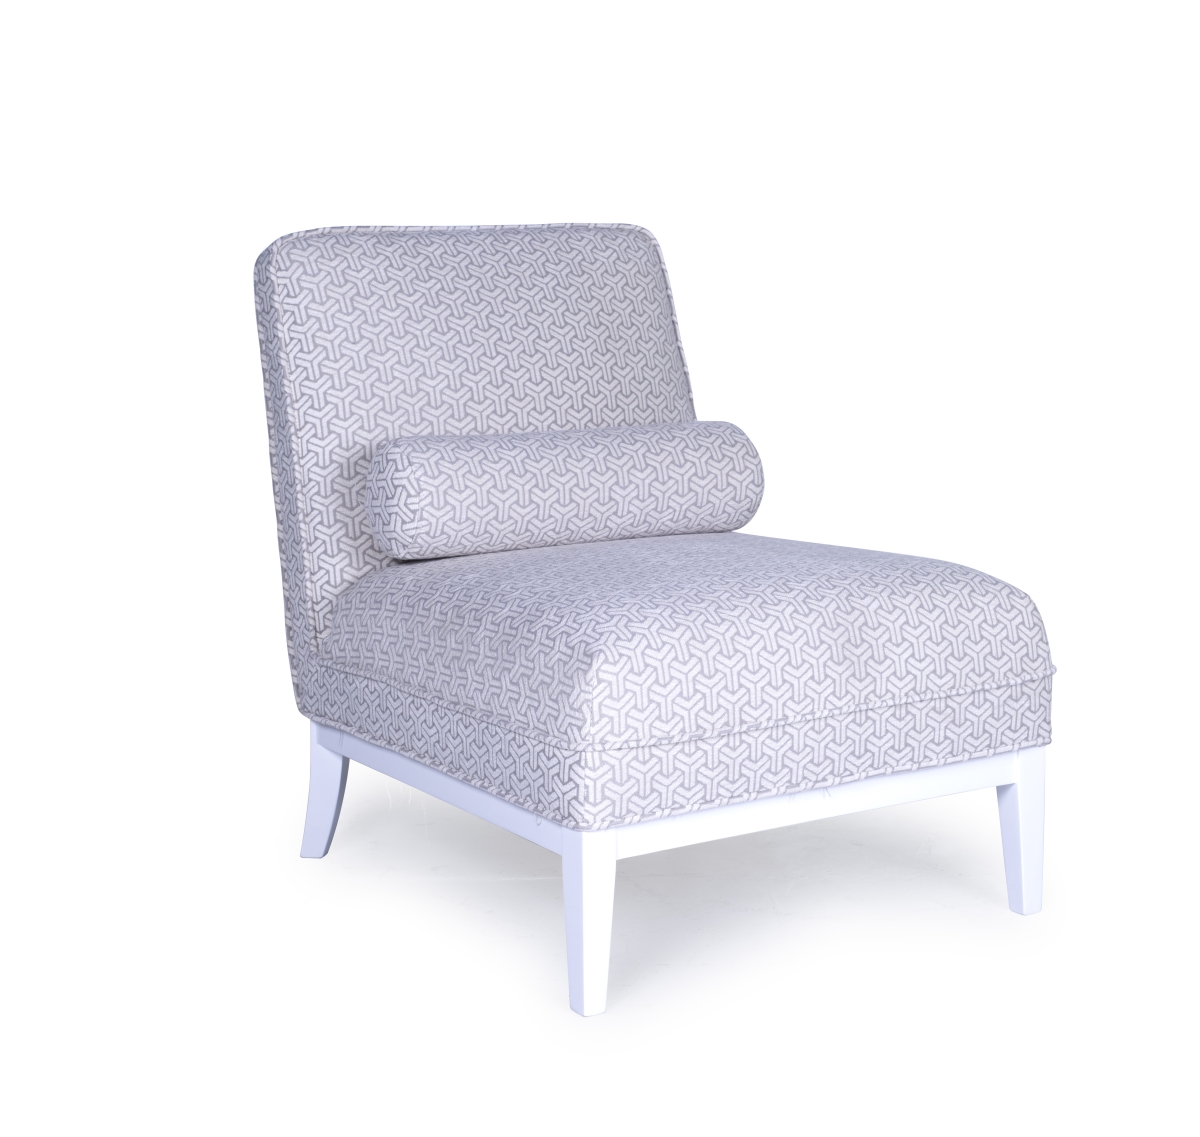 Re-pa003 Firenze Collection Upholster Lounge Chair With Pillow